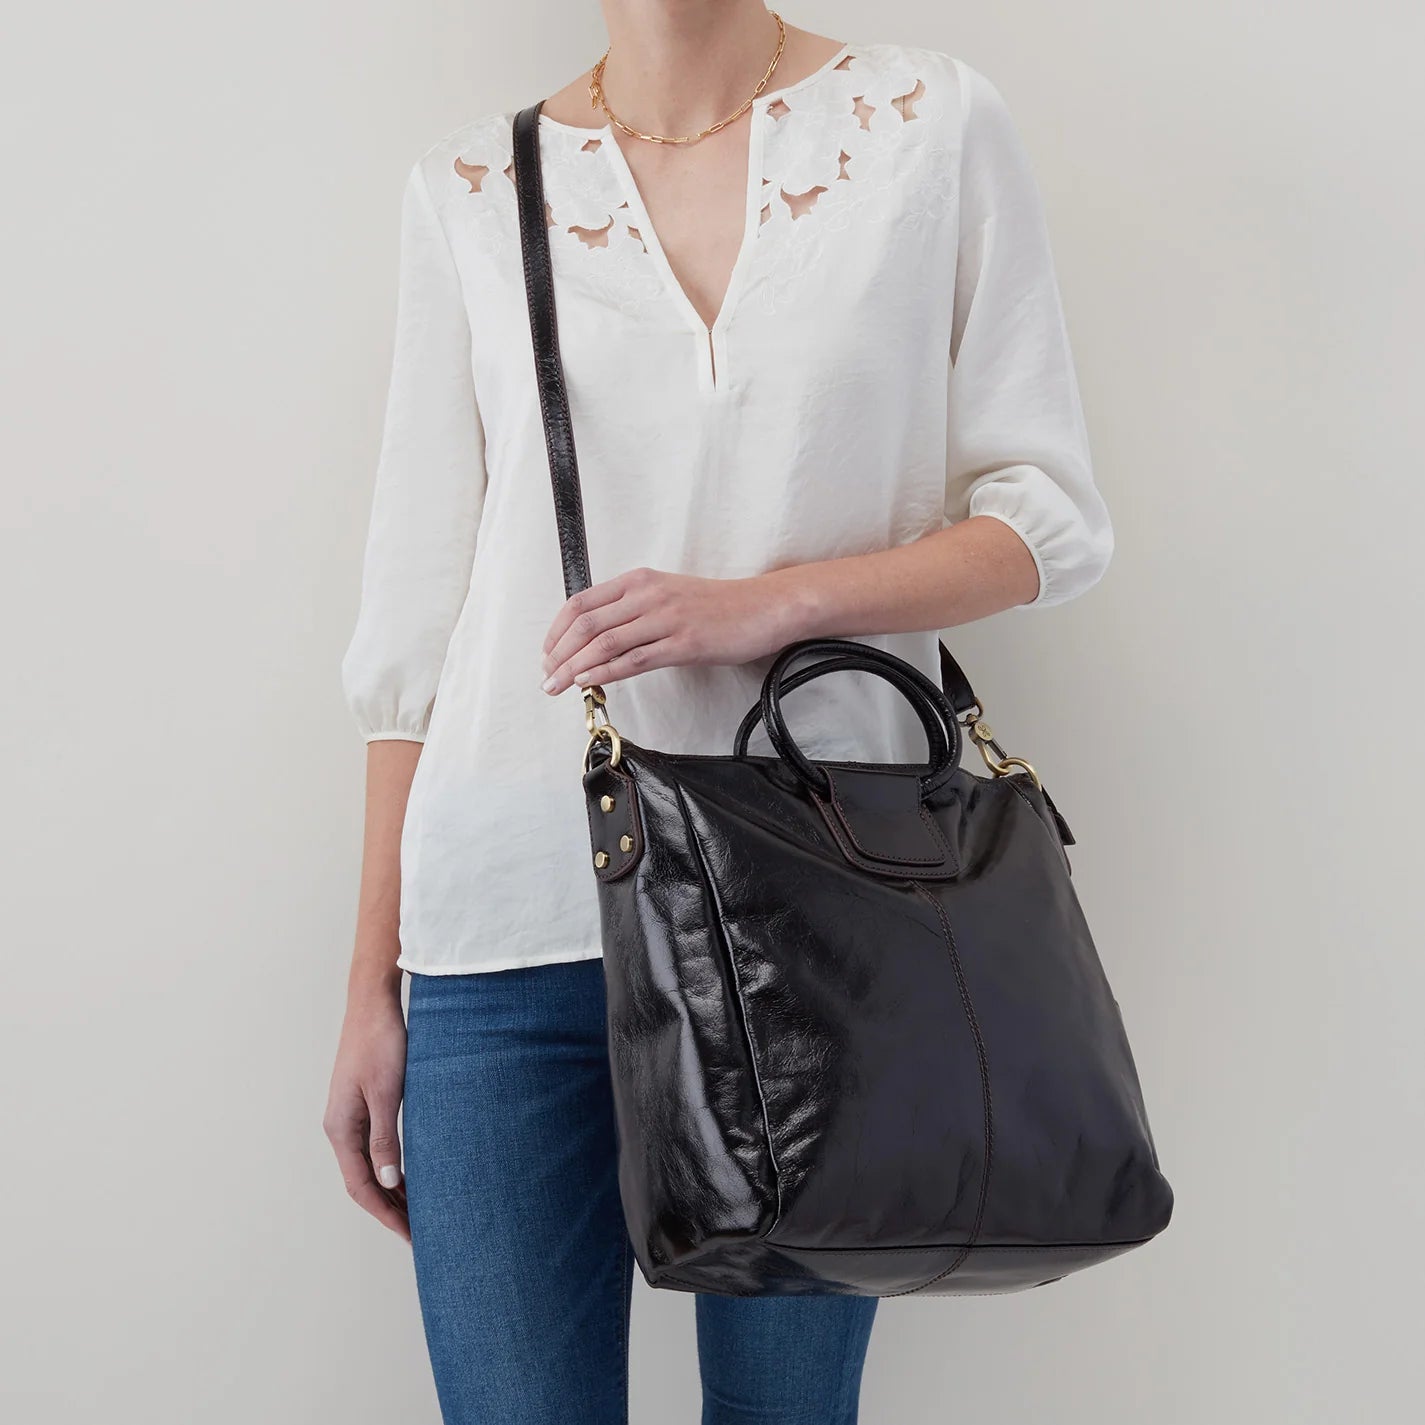 The Sheila Large Satchel in black has a side slip pocket for your phone, a removable strap and circular top handles. Available at the Painted Cottage in Edgewater, MD